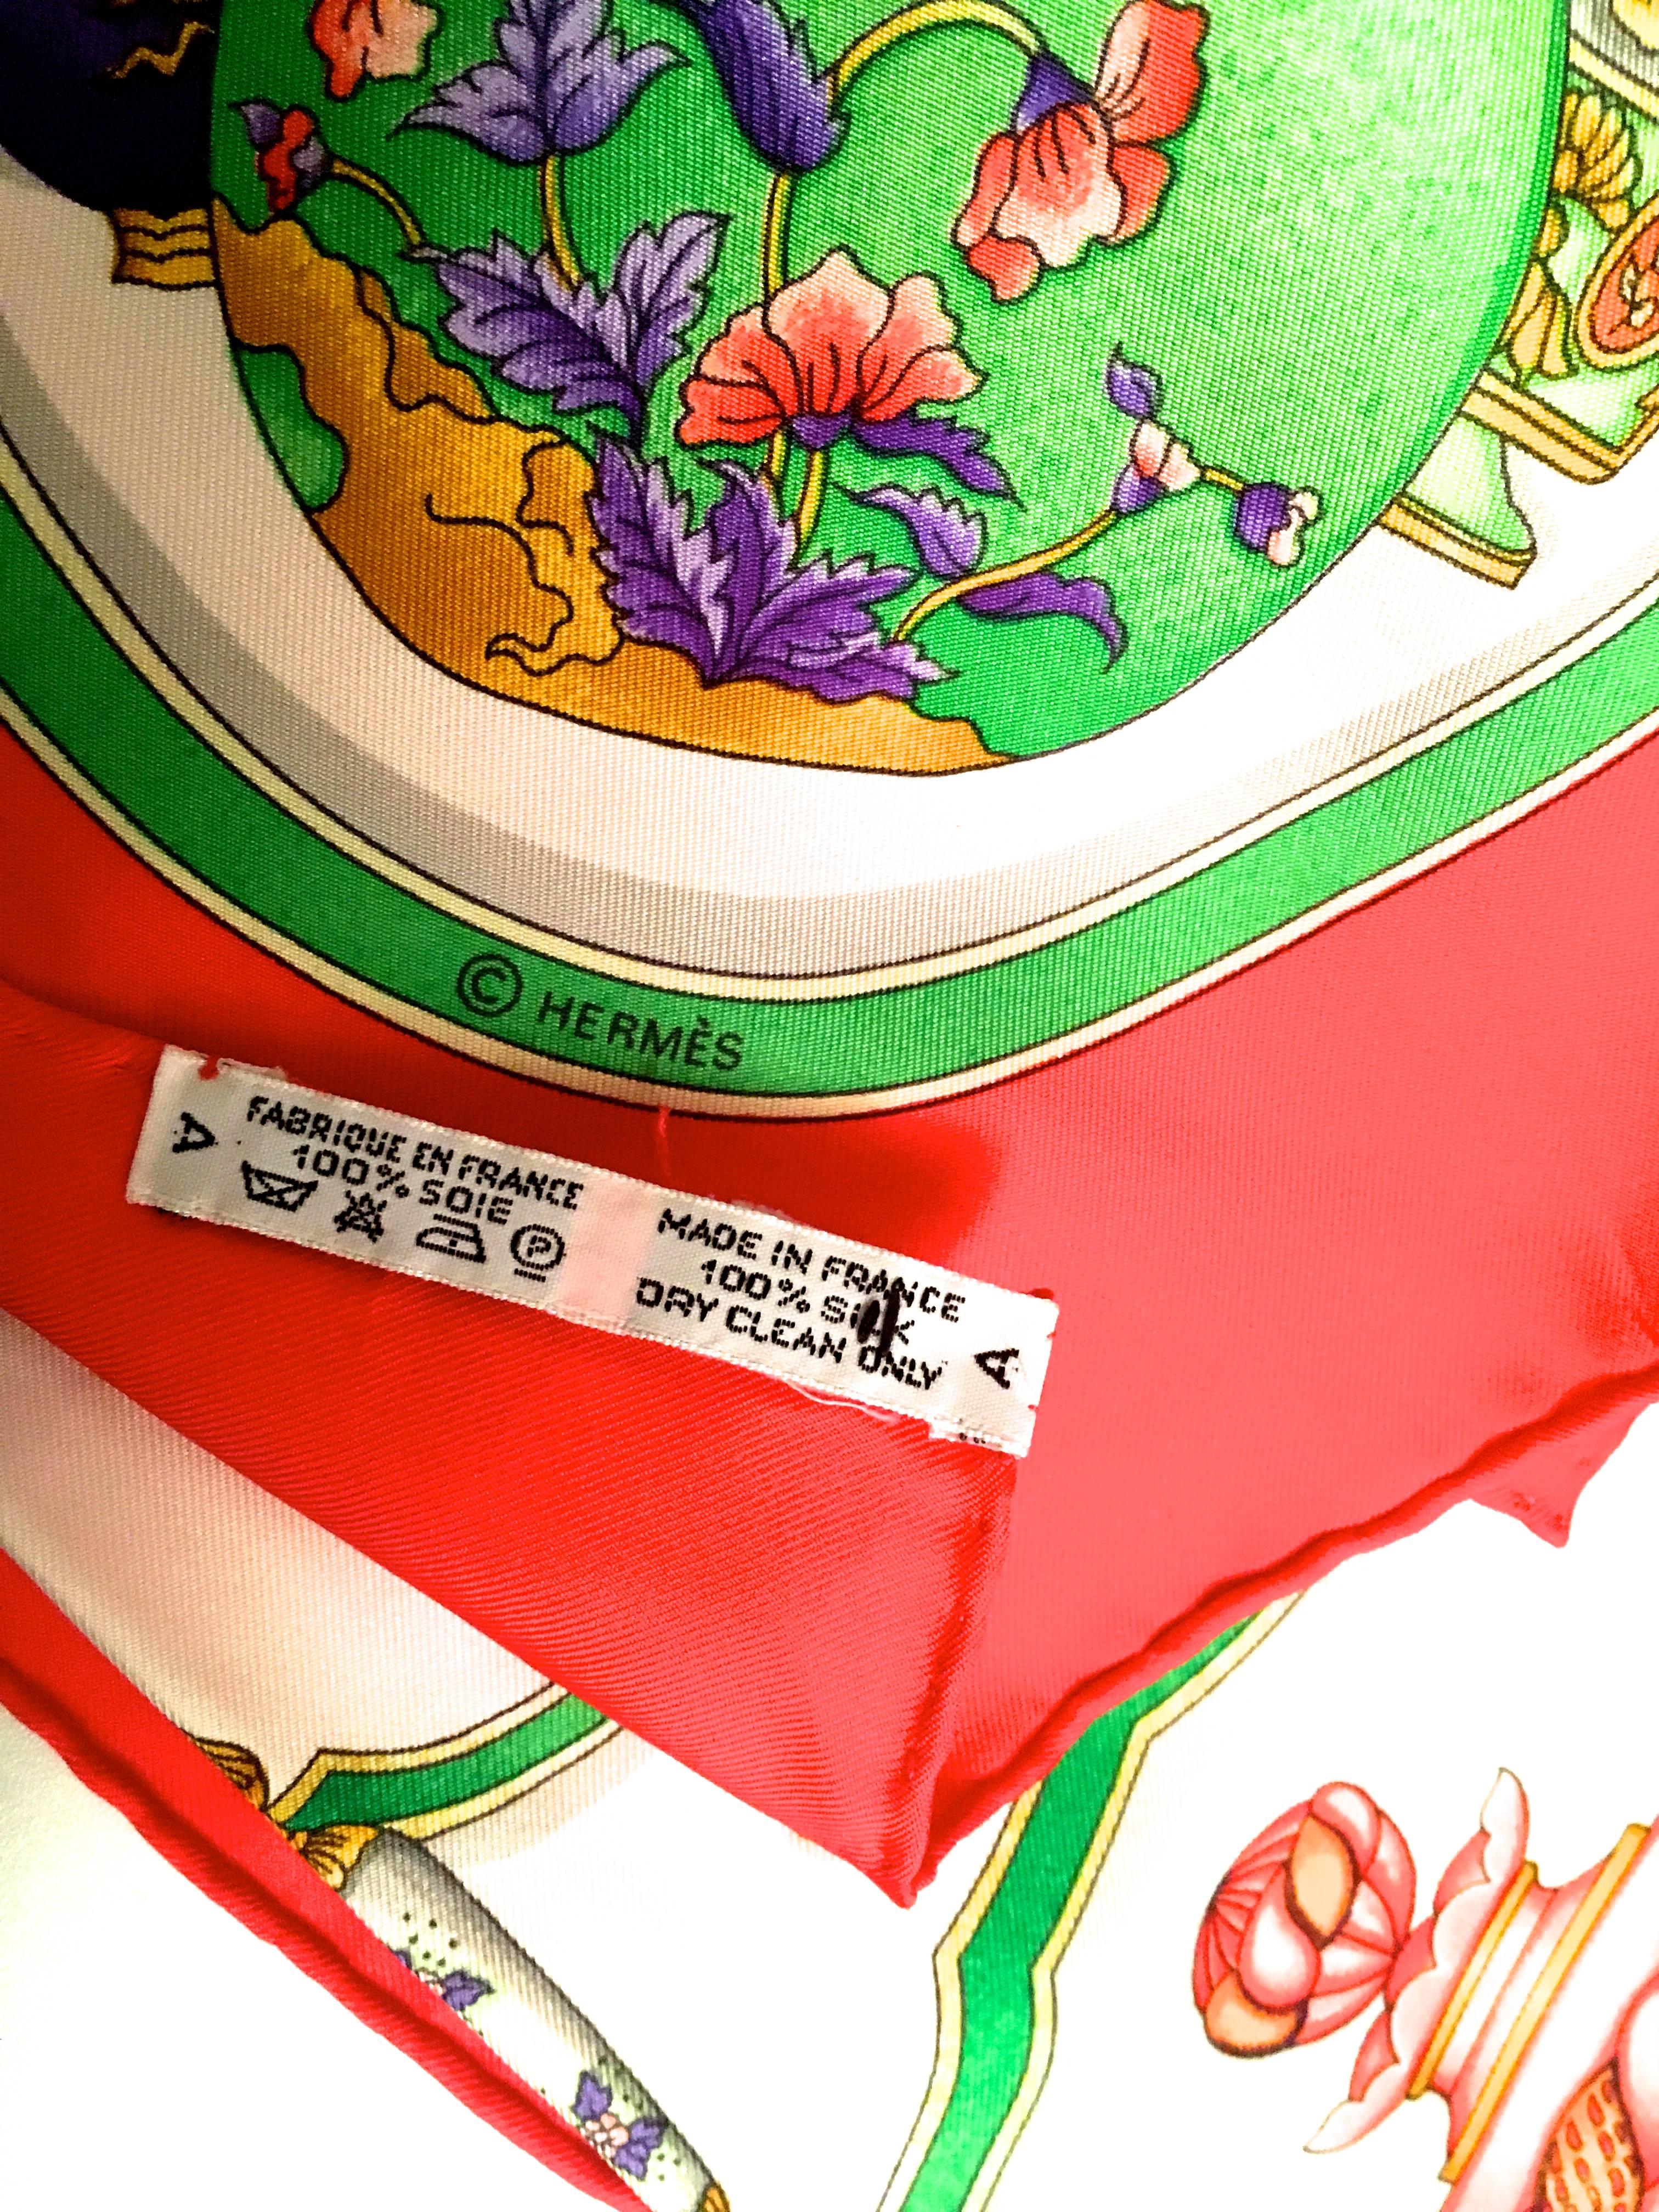  Hermes Silk Scarf - Catherine Baschet - 1988 RARE In Excellent Condition For Sale In Boca Raton, FL